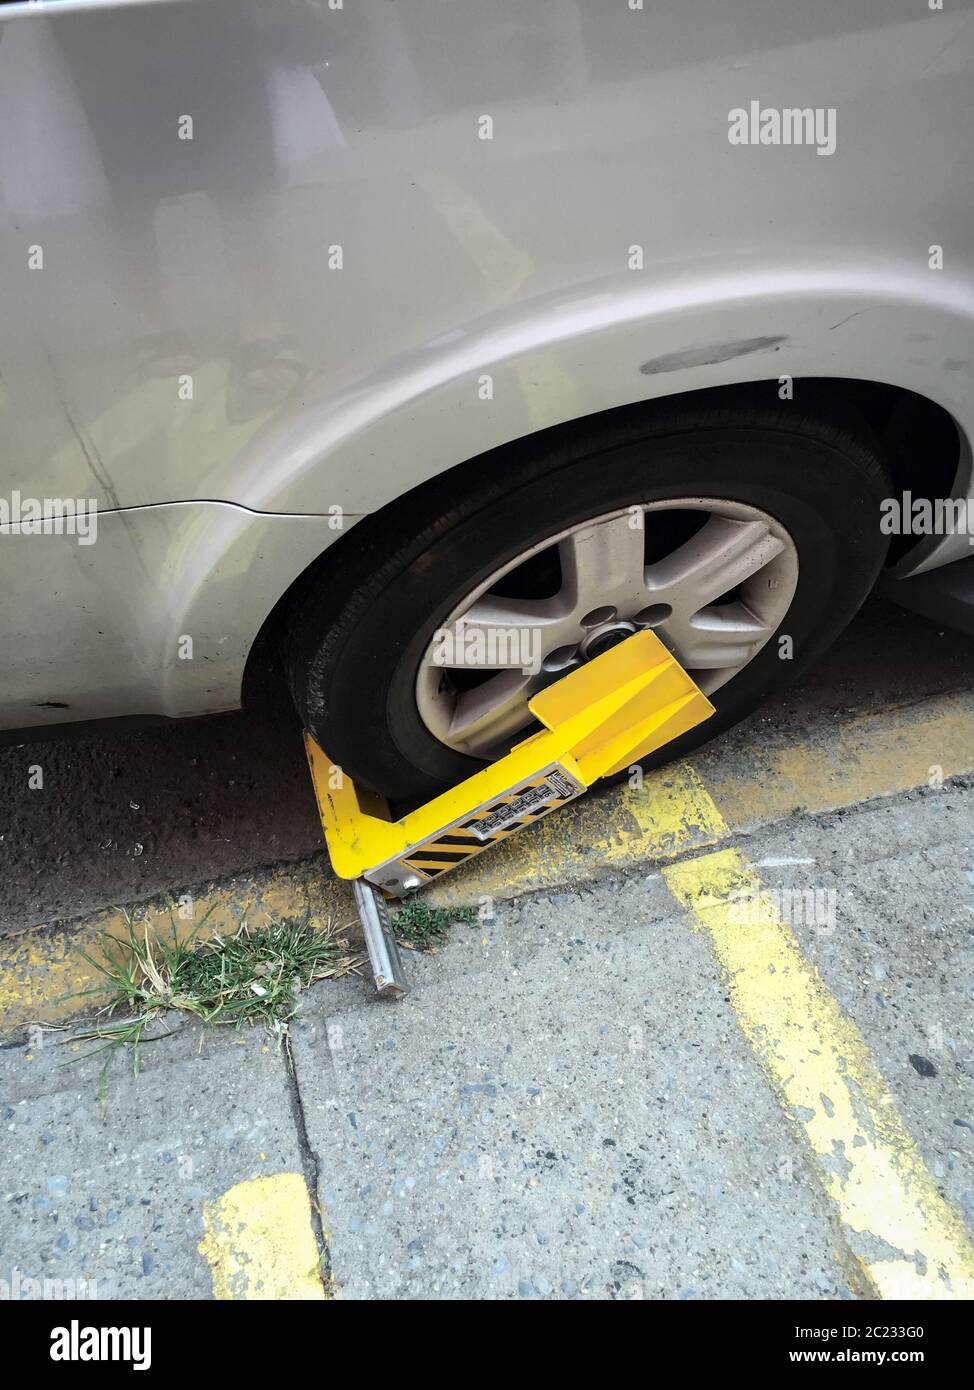 Parking claw on the car Stock Photo